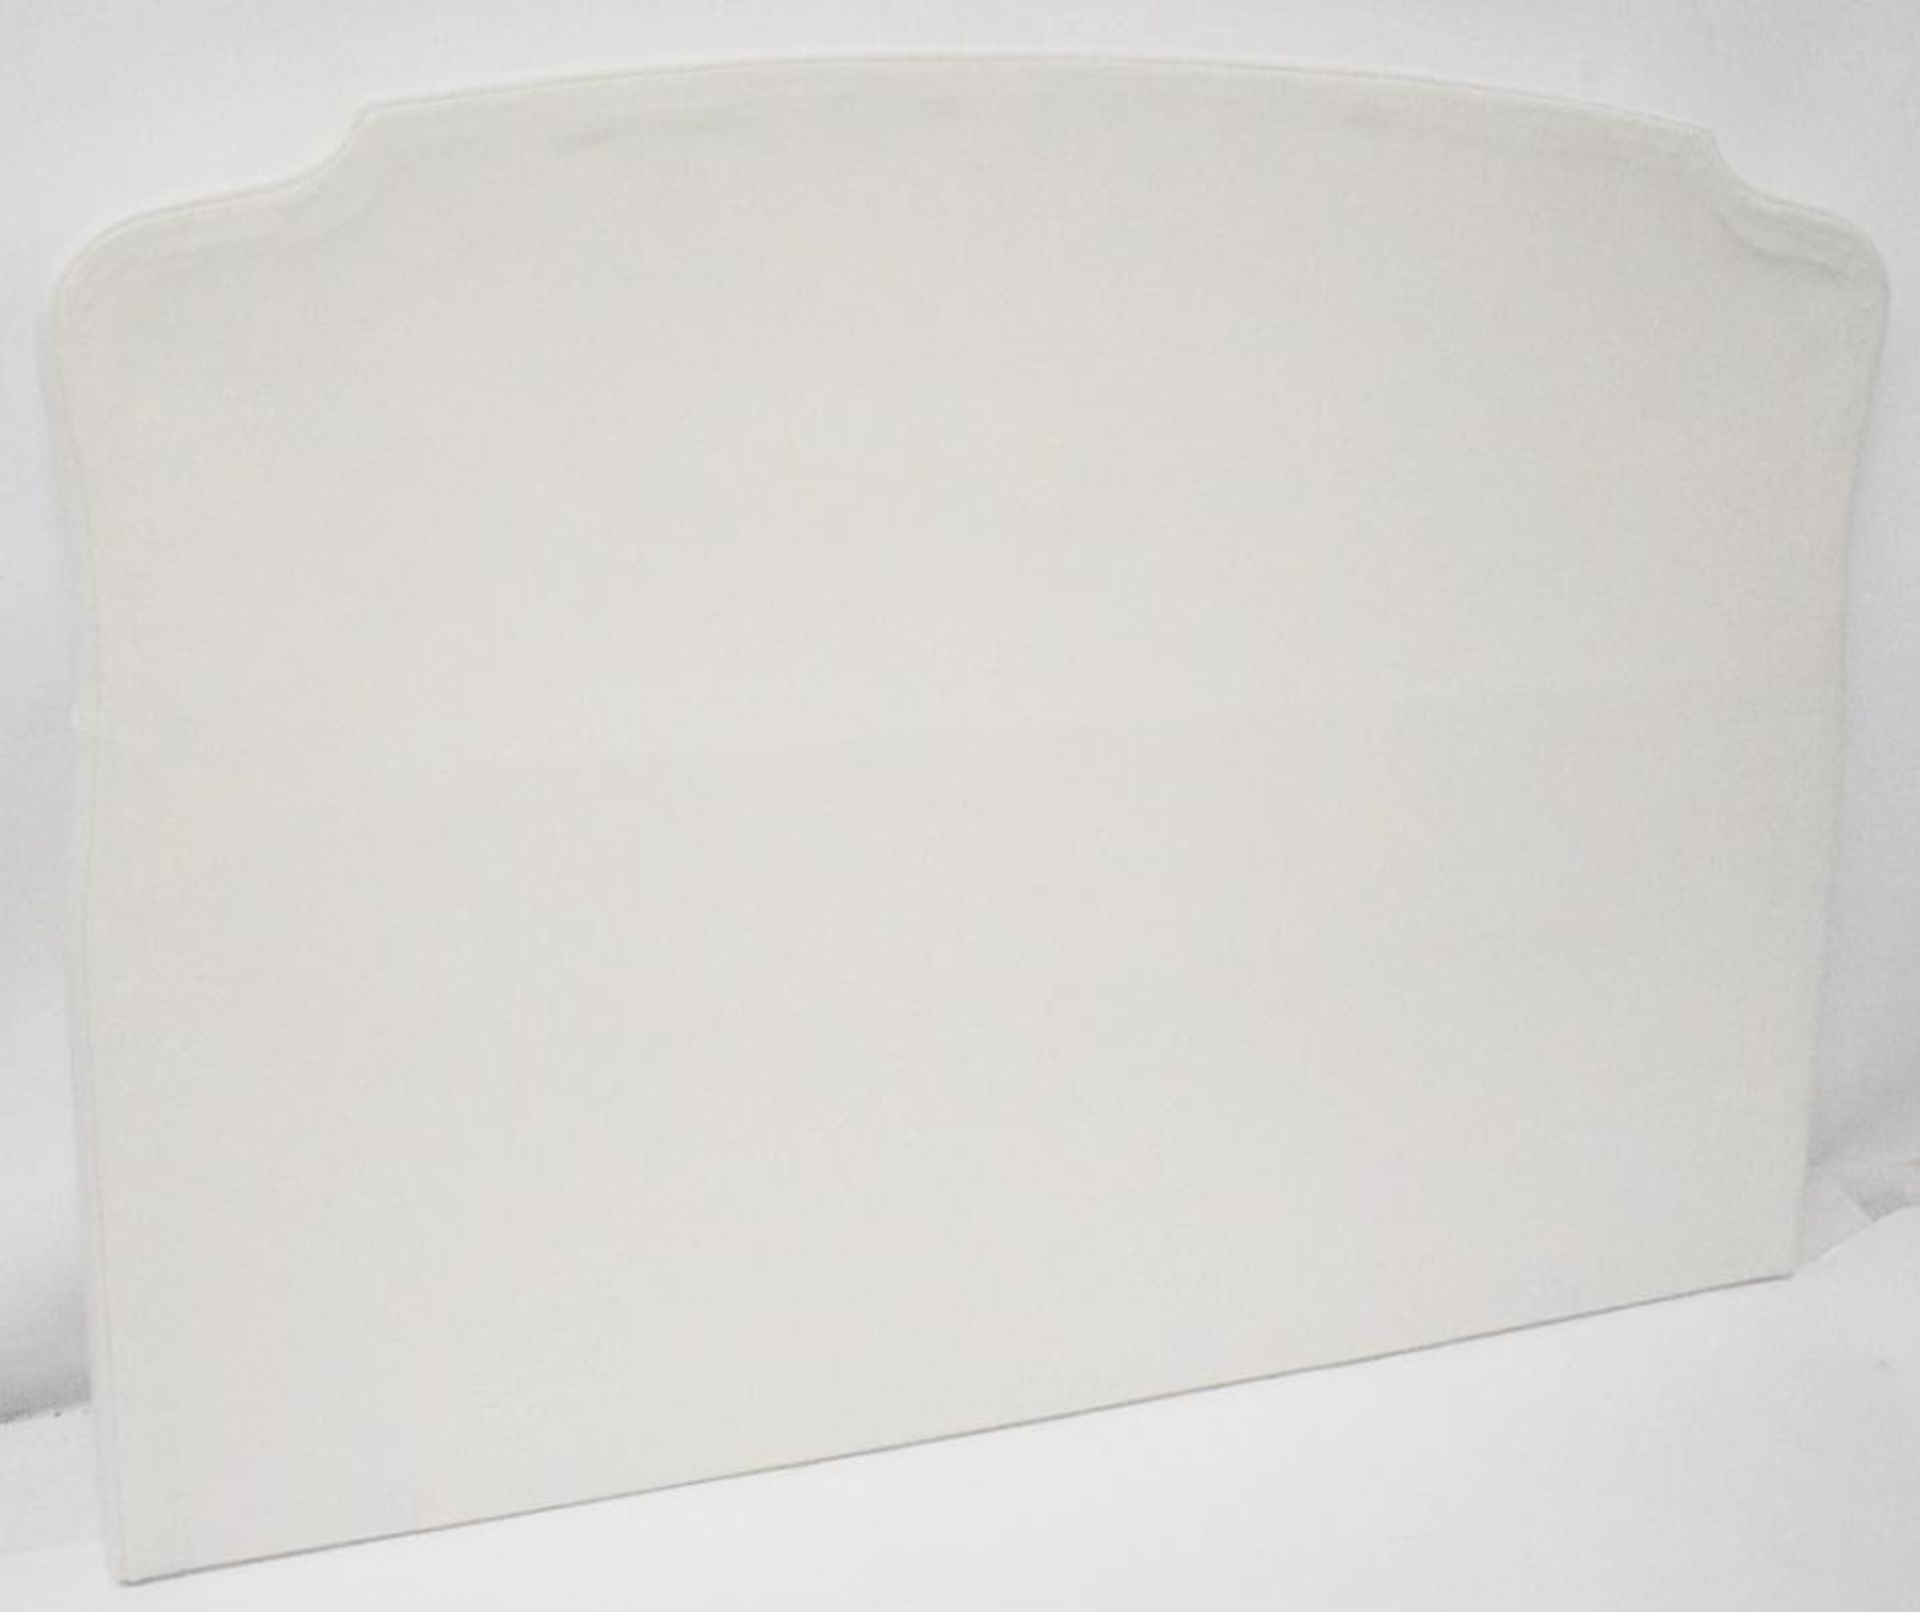 1 x VISPRING 'Eccleston' Handcrafted Leather Upholstered Super-King Size Headboard - Colour Ivory - - Image 3 of 5